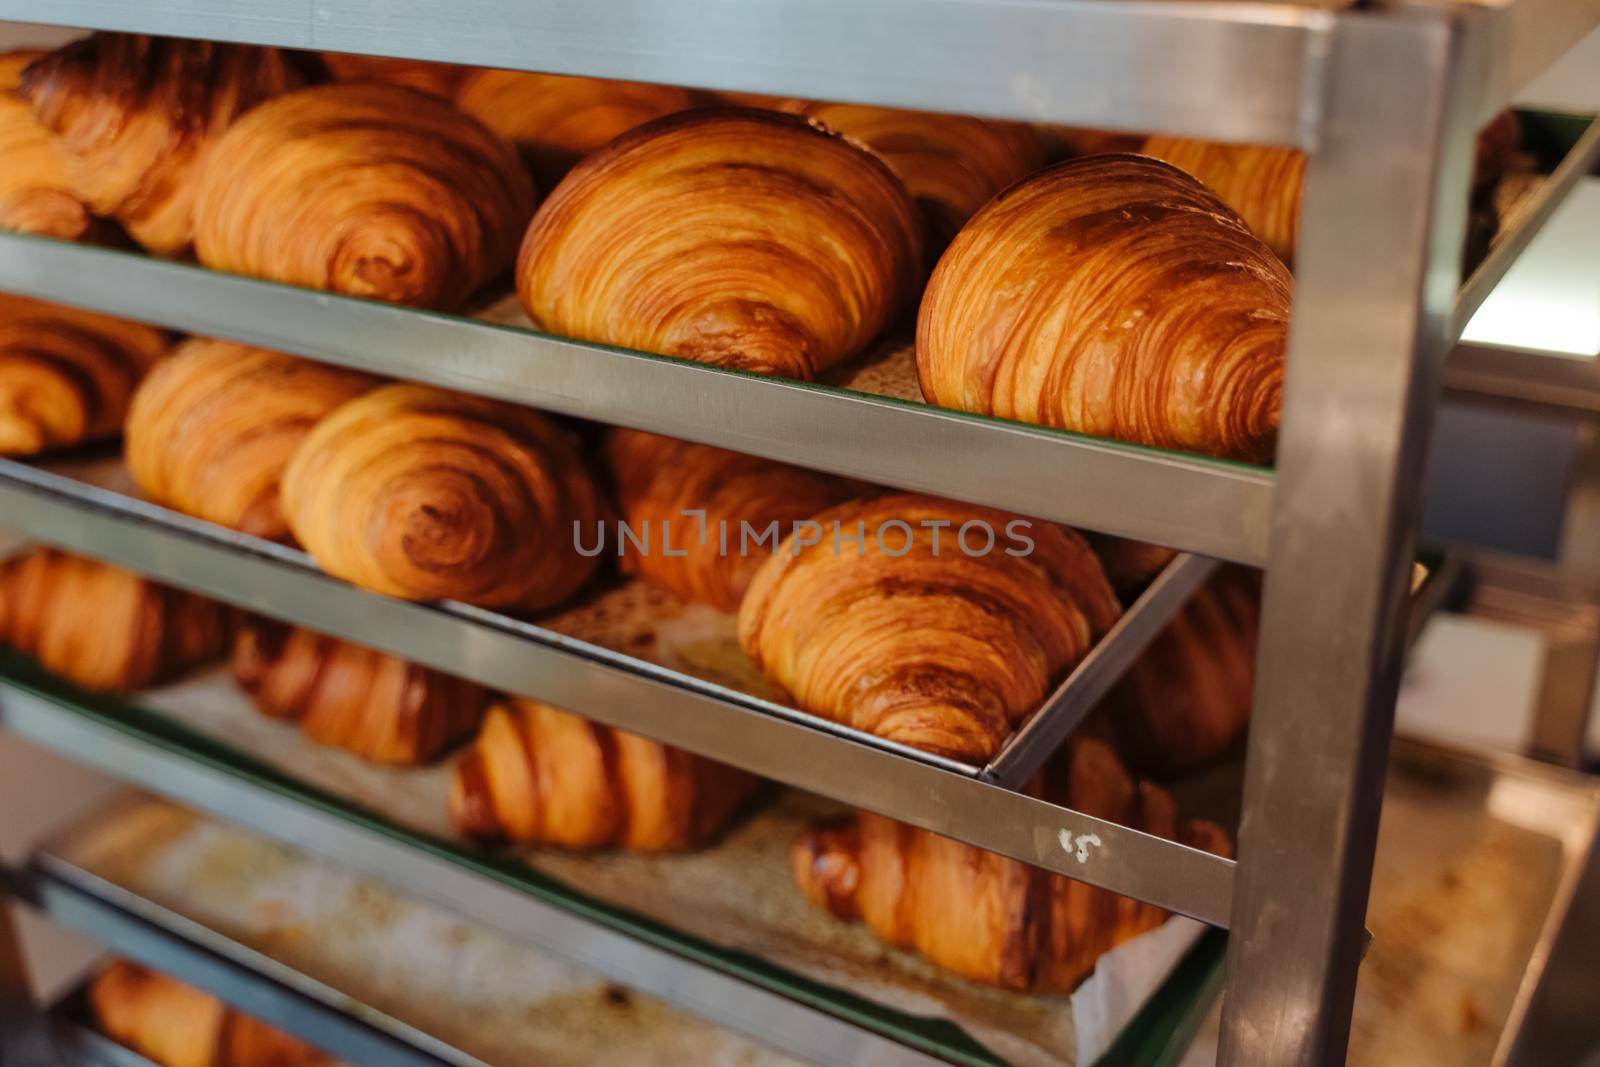 Bun production. Family bakery. Hot croissants only from the oven. Fresh bakery.